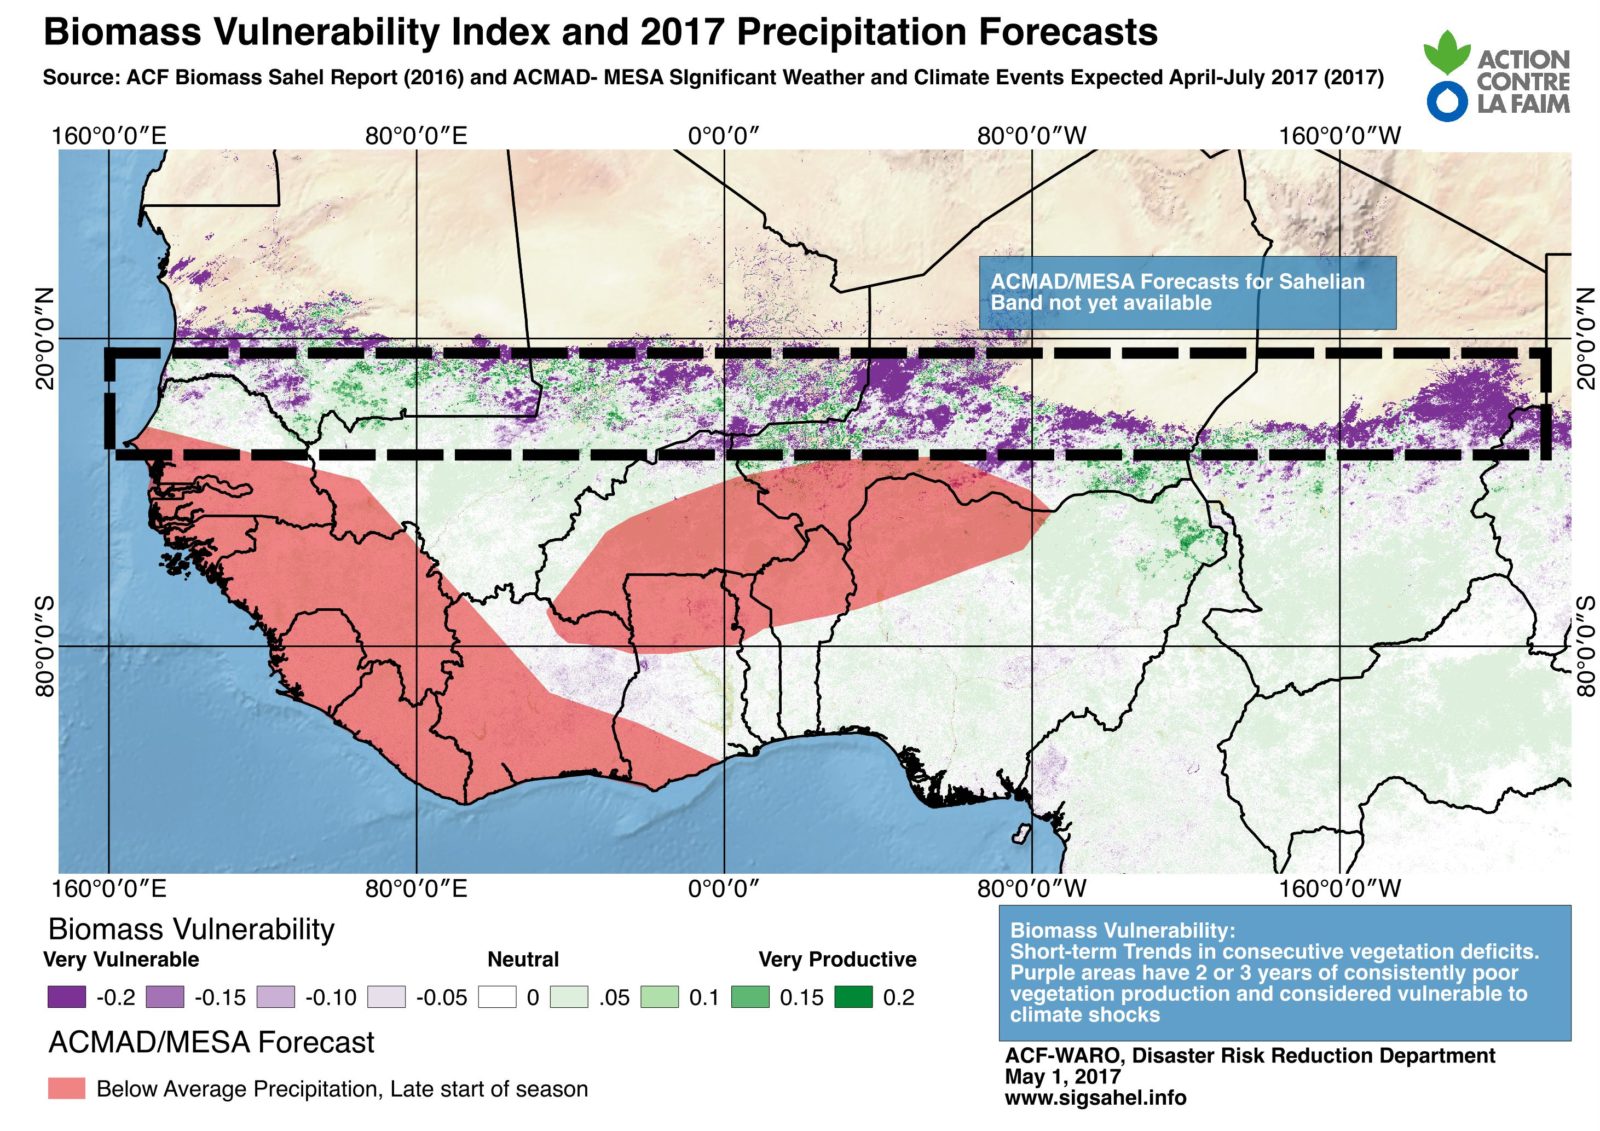 West Africa Rain Forecasts and Biomass Vulnerability: April-July